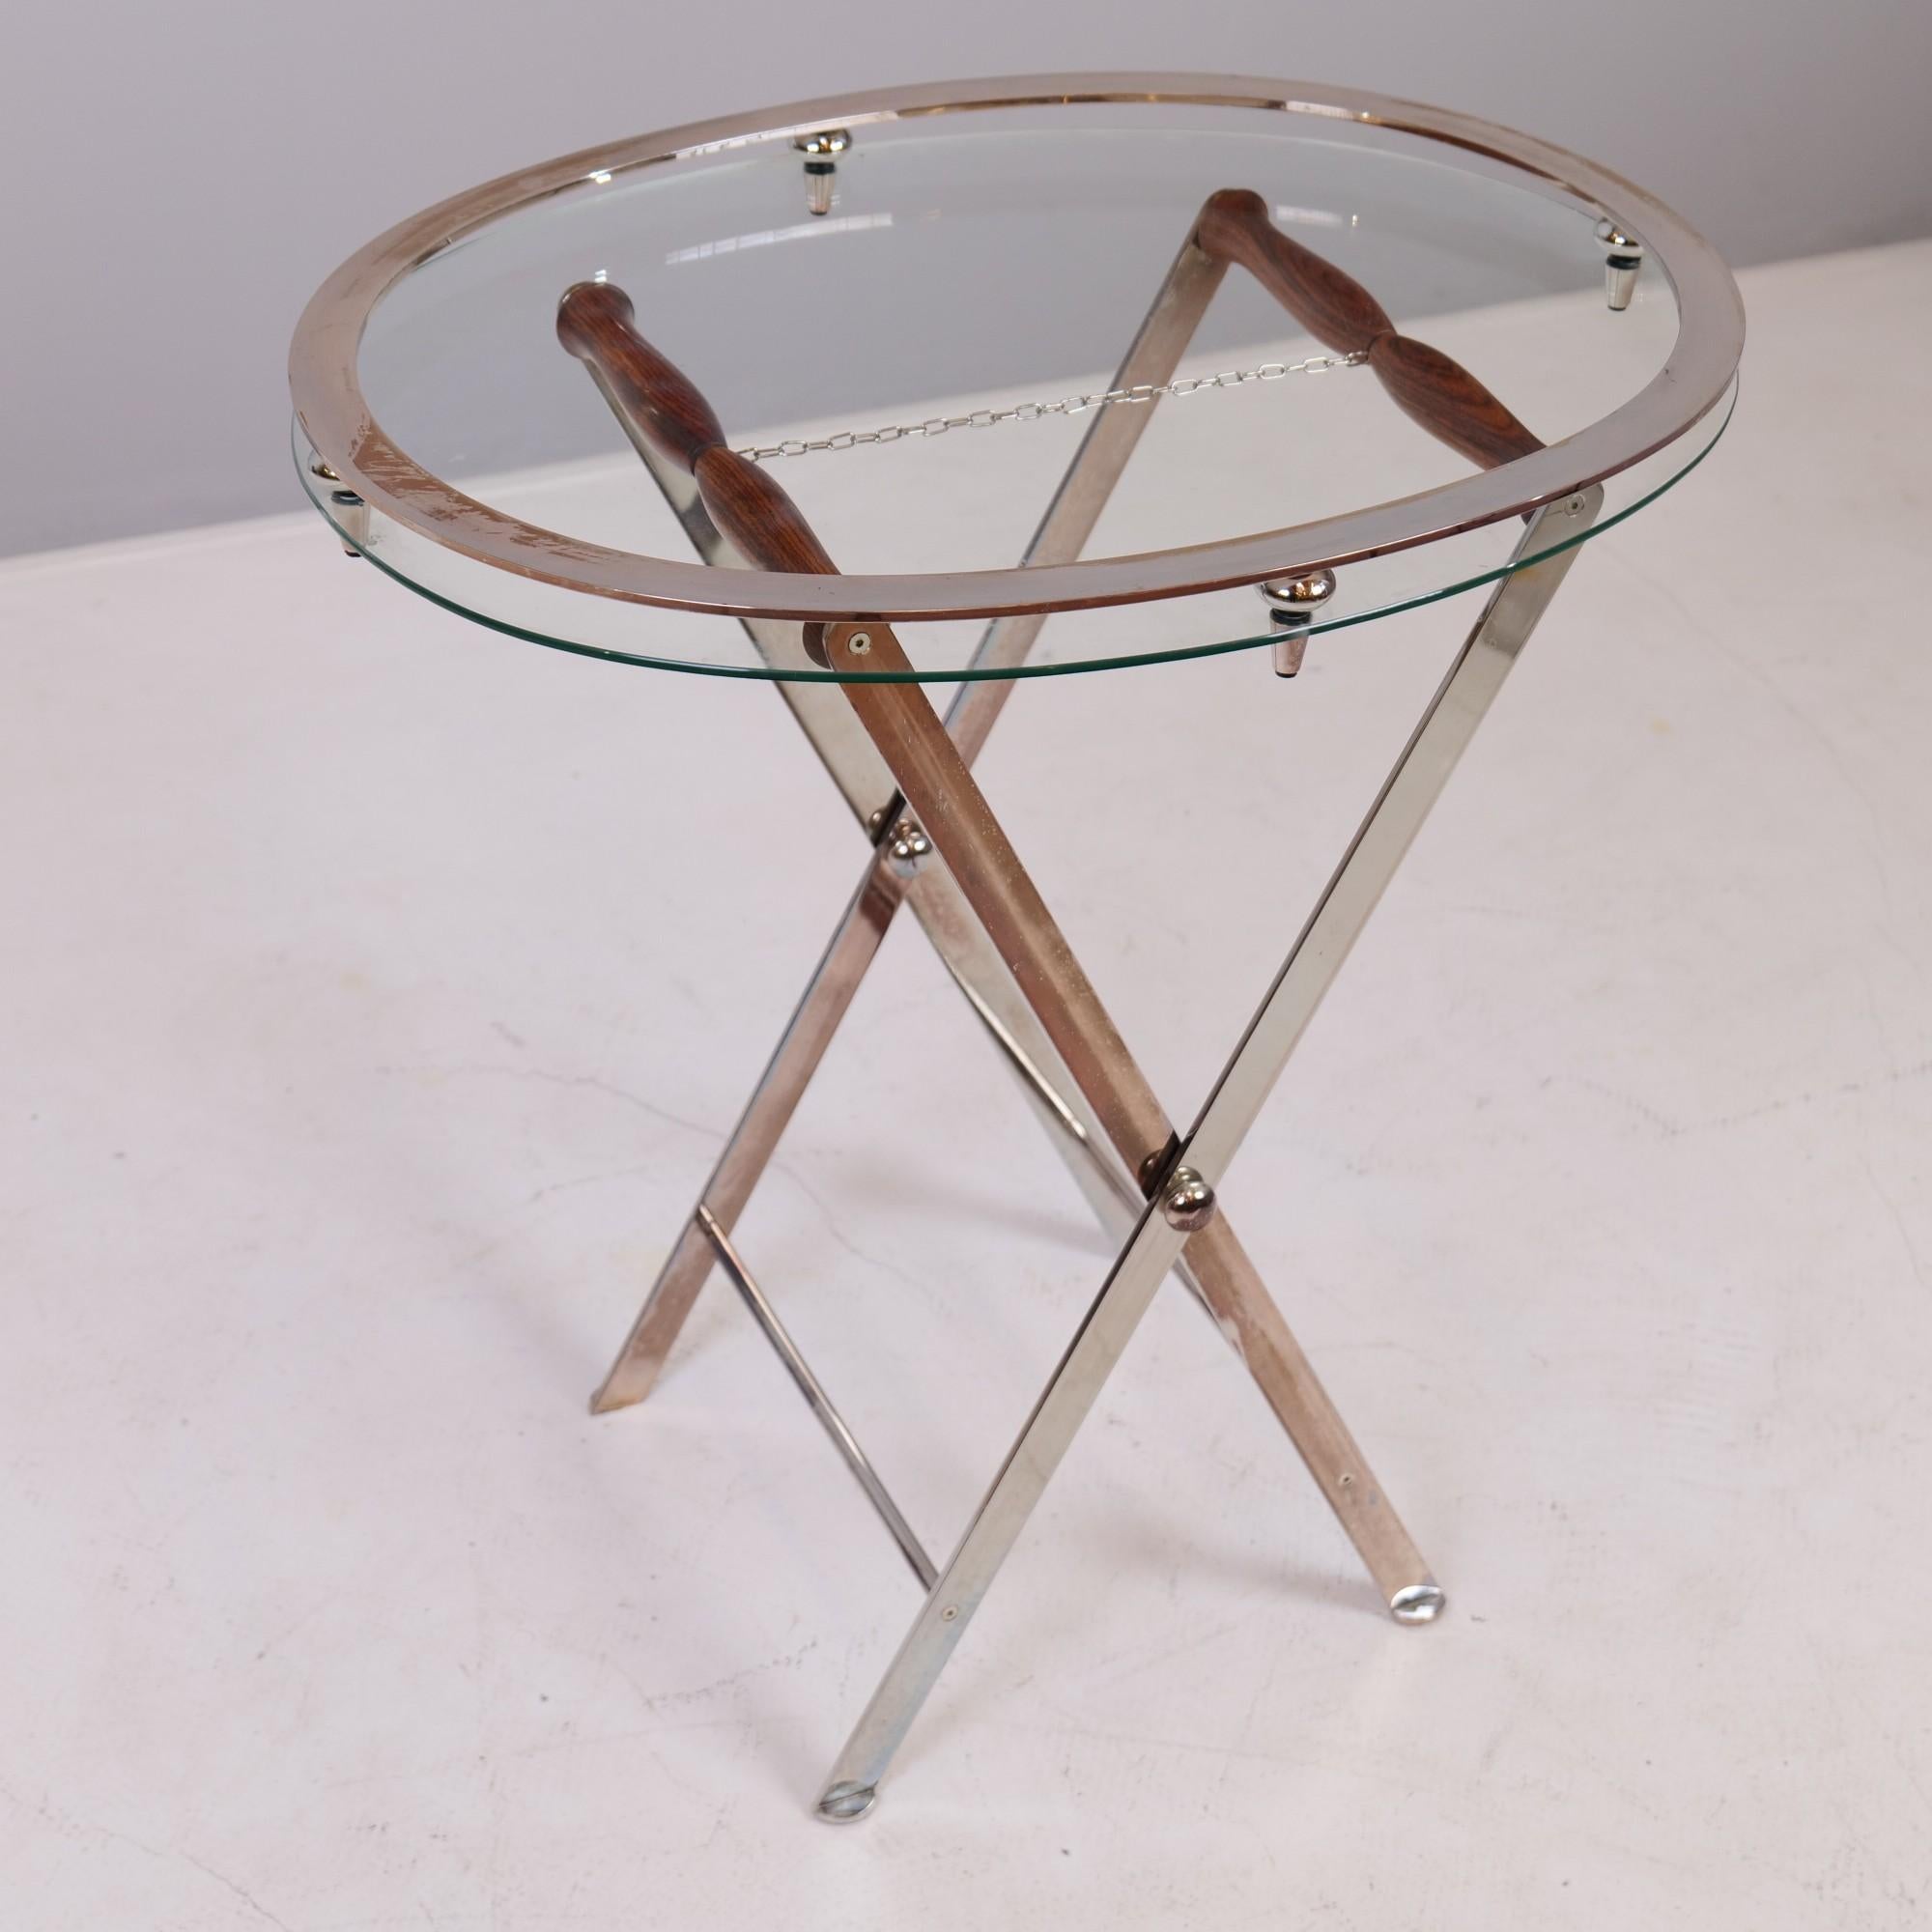 German High quality silver plated vintage serving table with removable top For Sale